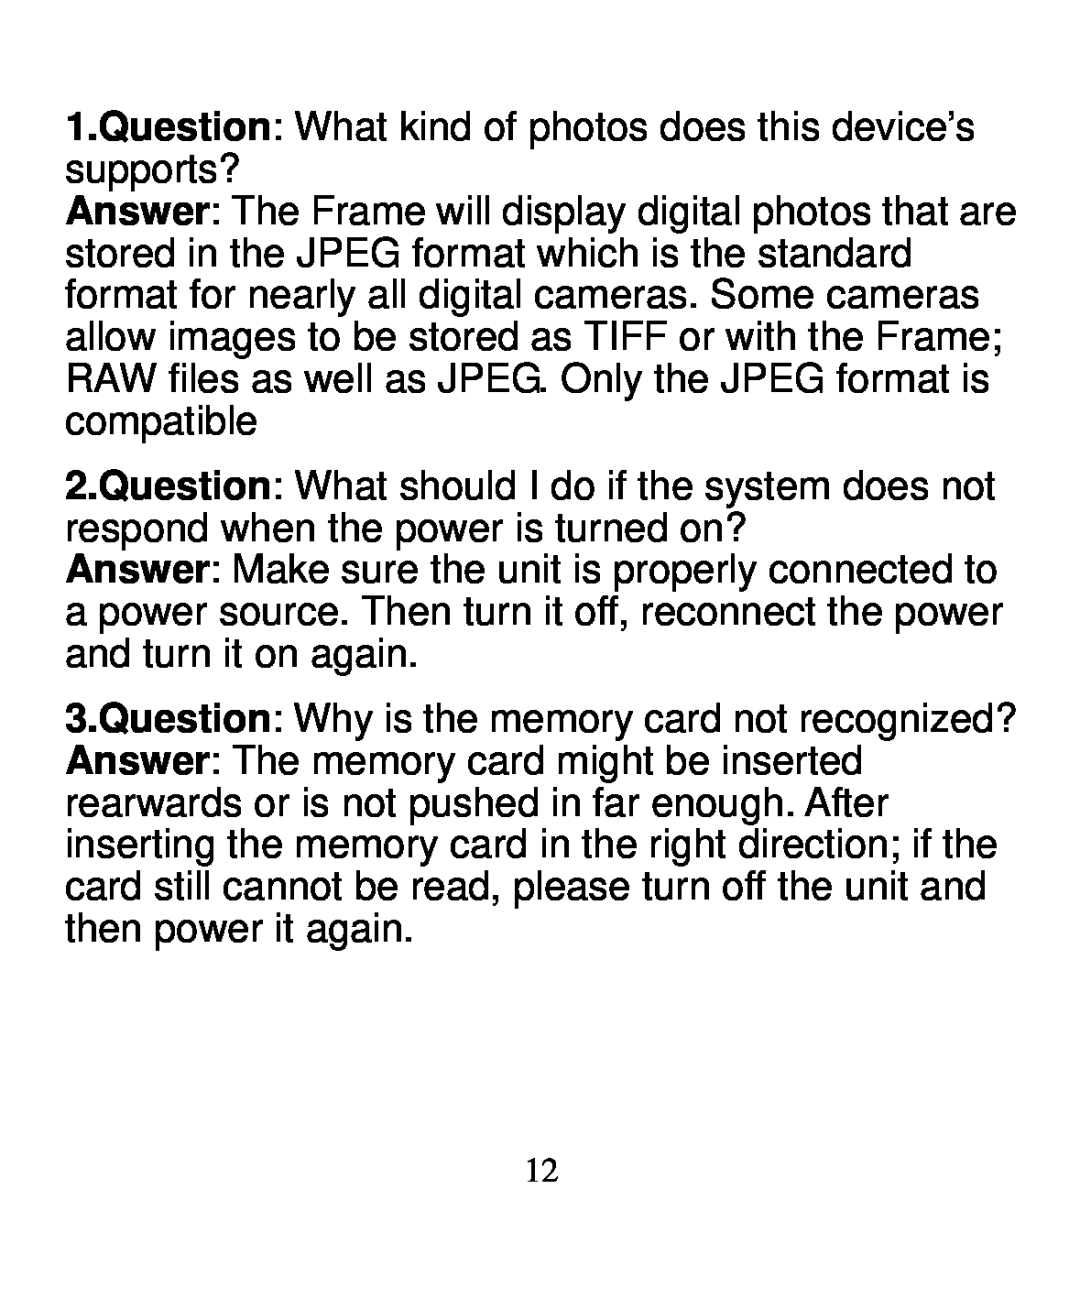 Nextar N3-502 Question What kind of photos does this device’s supports?, Question Why is the memory card not recognized? 